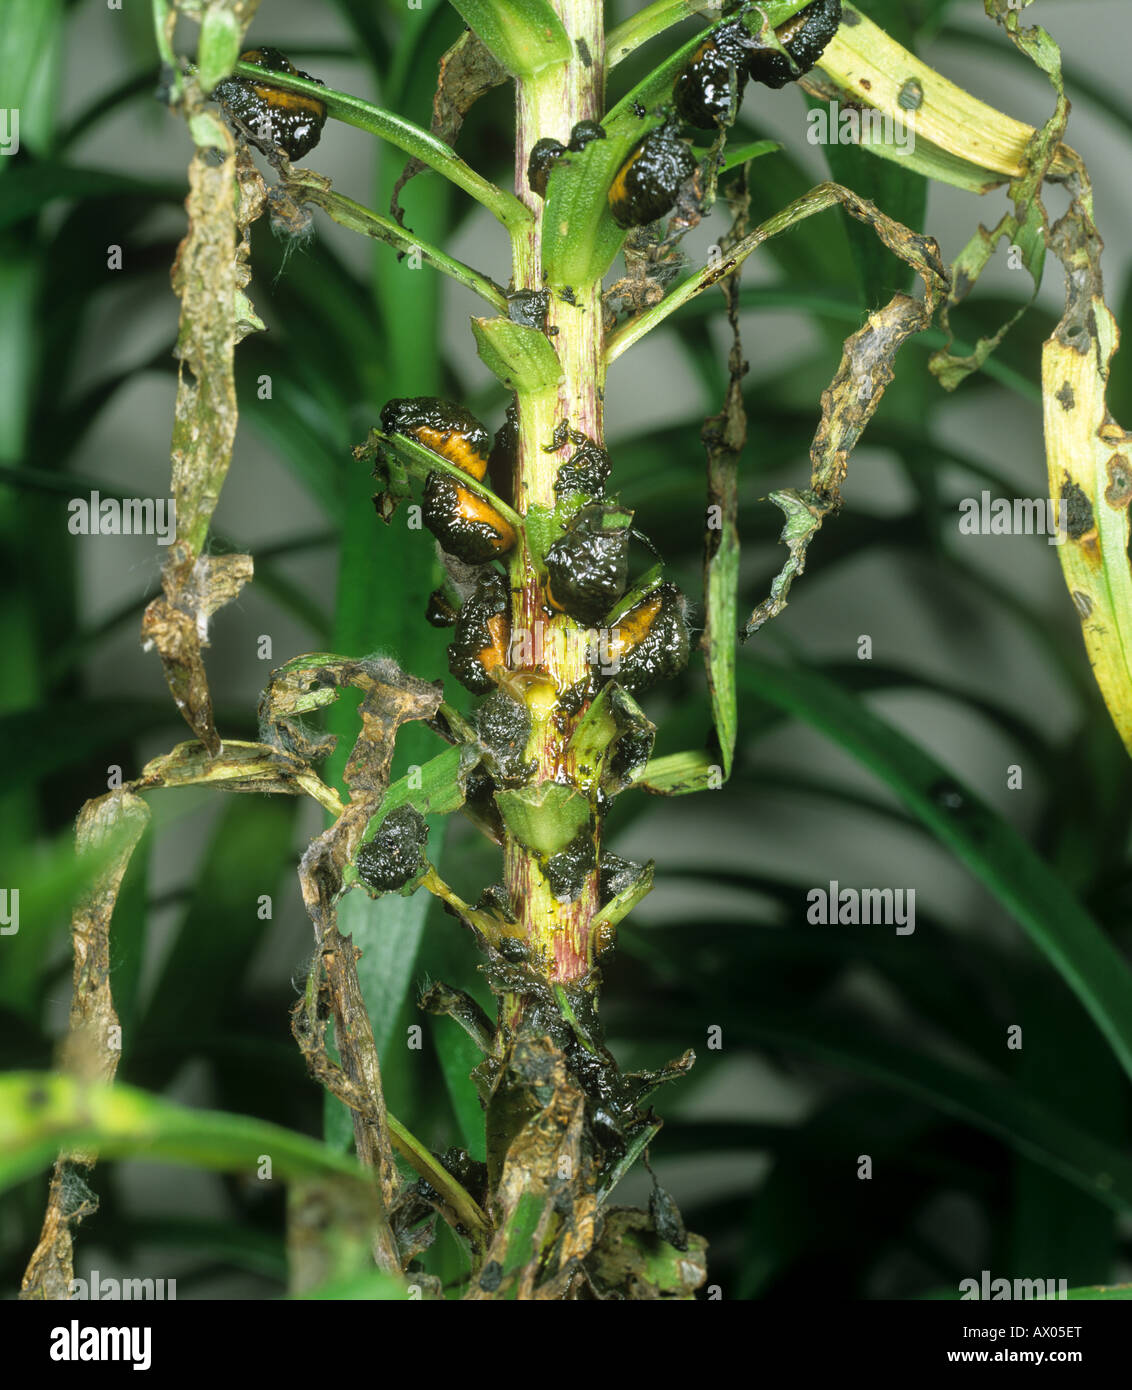 Lily beetle Lilioceris lilii sticky gelatinous unattractive grubs on a damaged lily plant Stock Photo